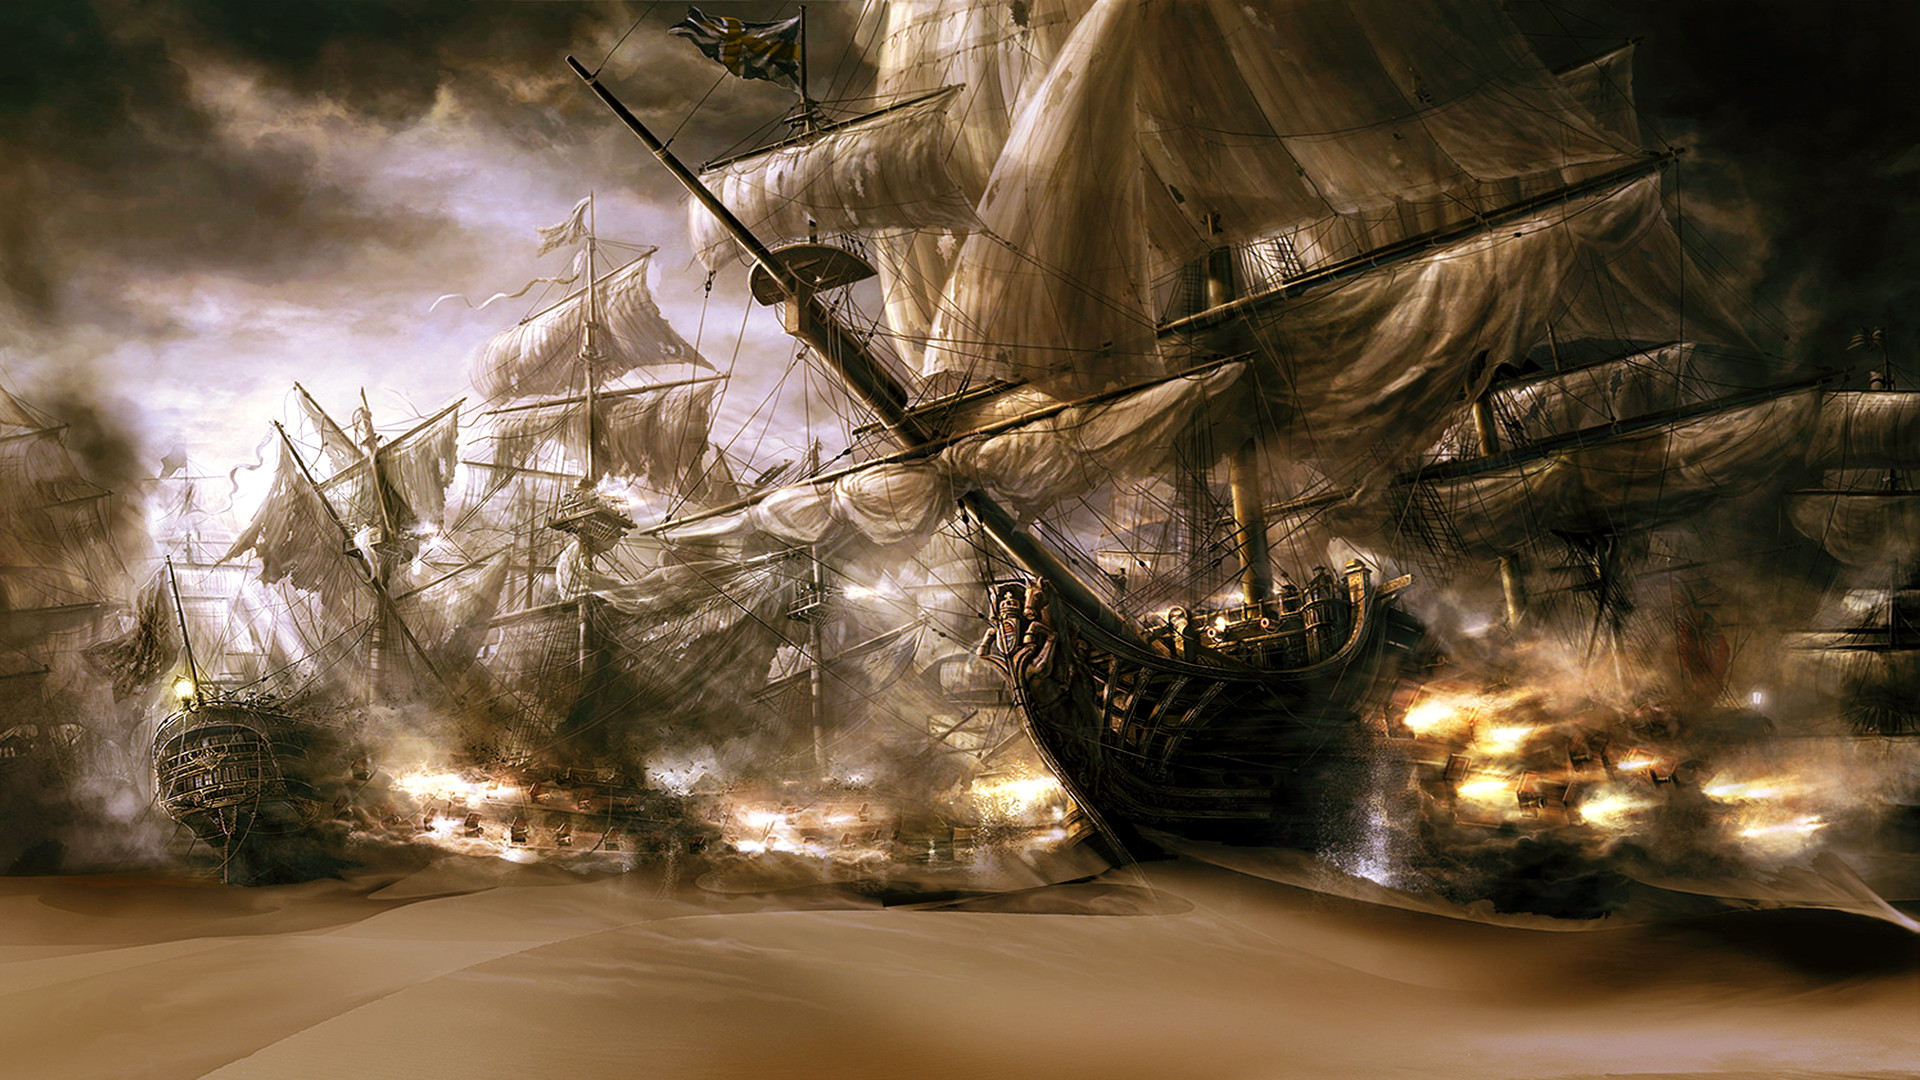 Pirate Ship Wallpaper HD (71+ images)